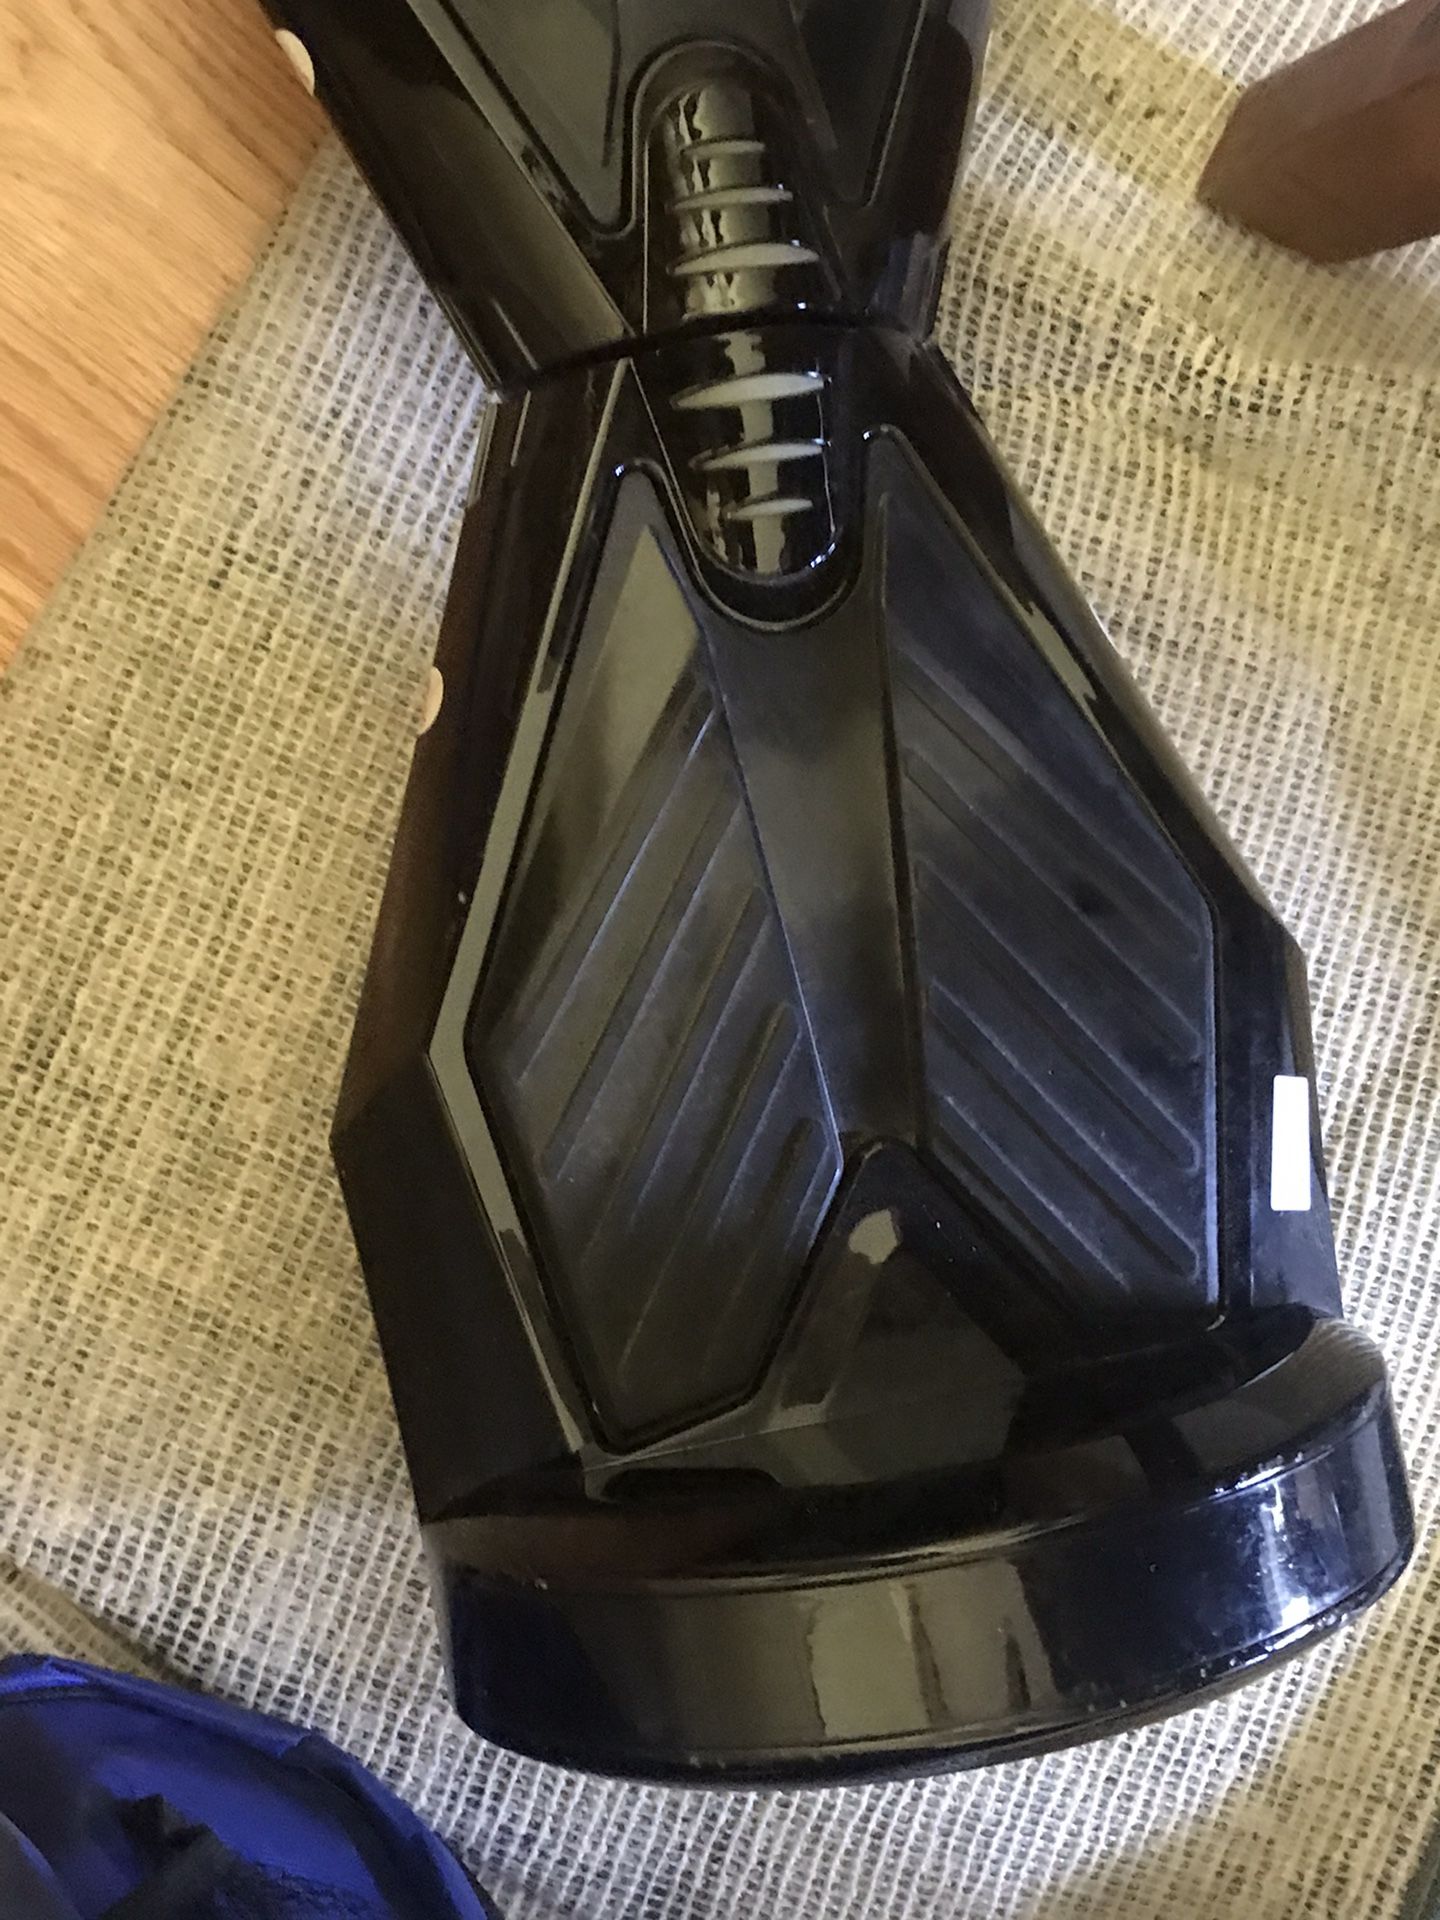 Brand new hoverboard with original box led with Bluetooth speaker built in